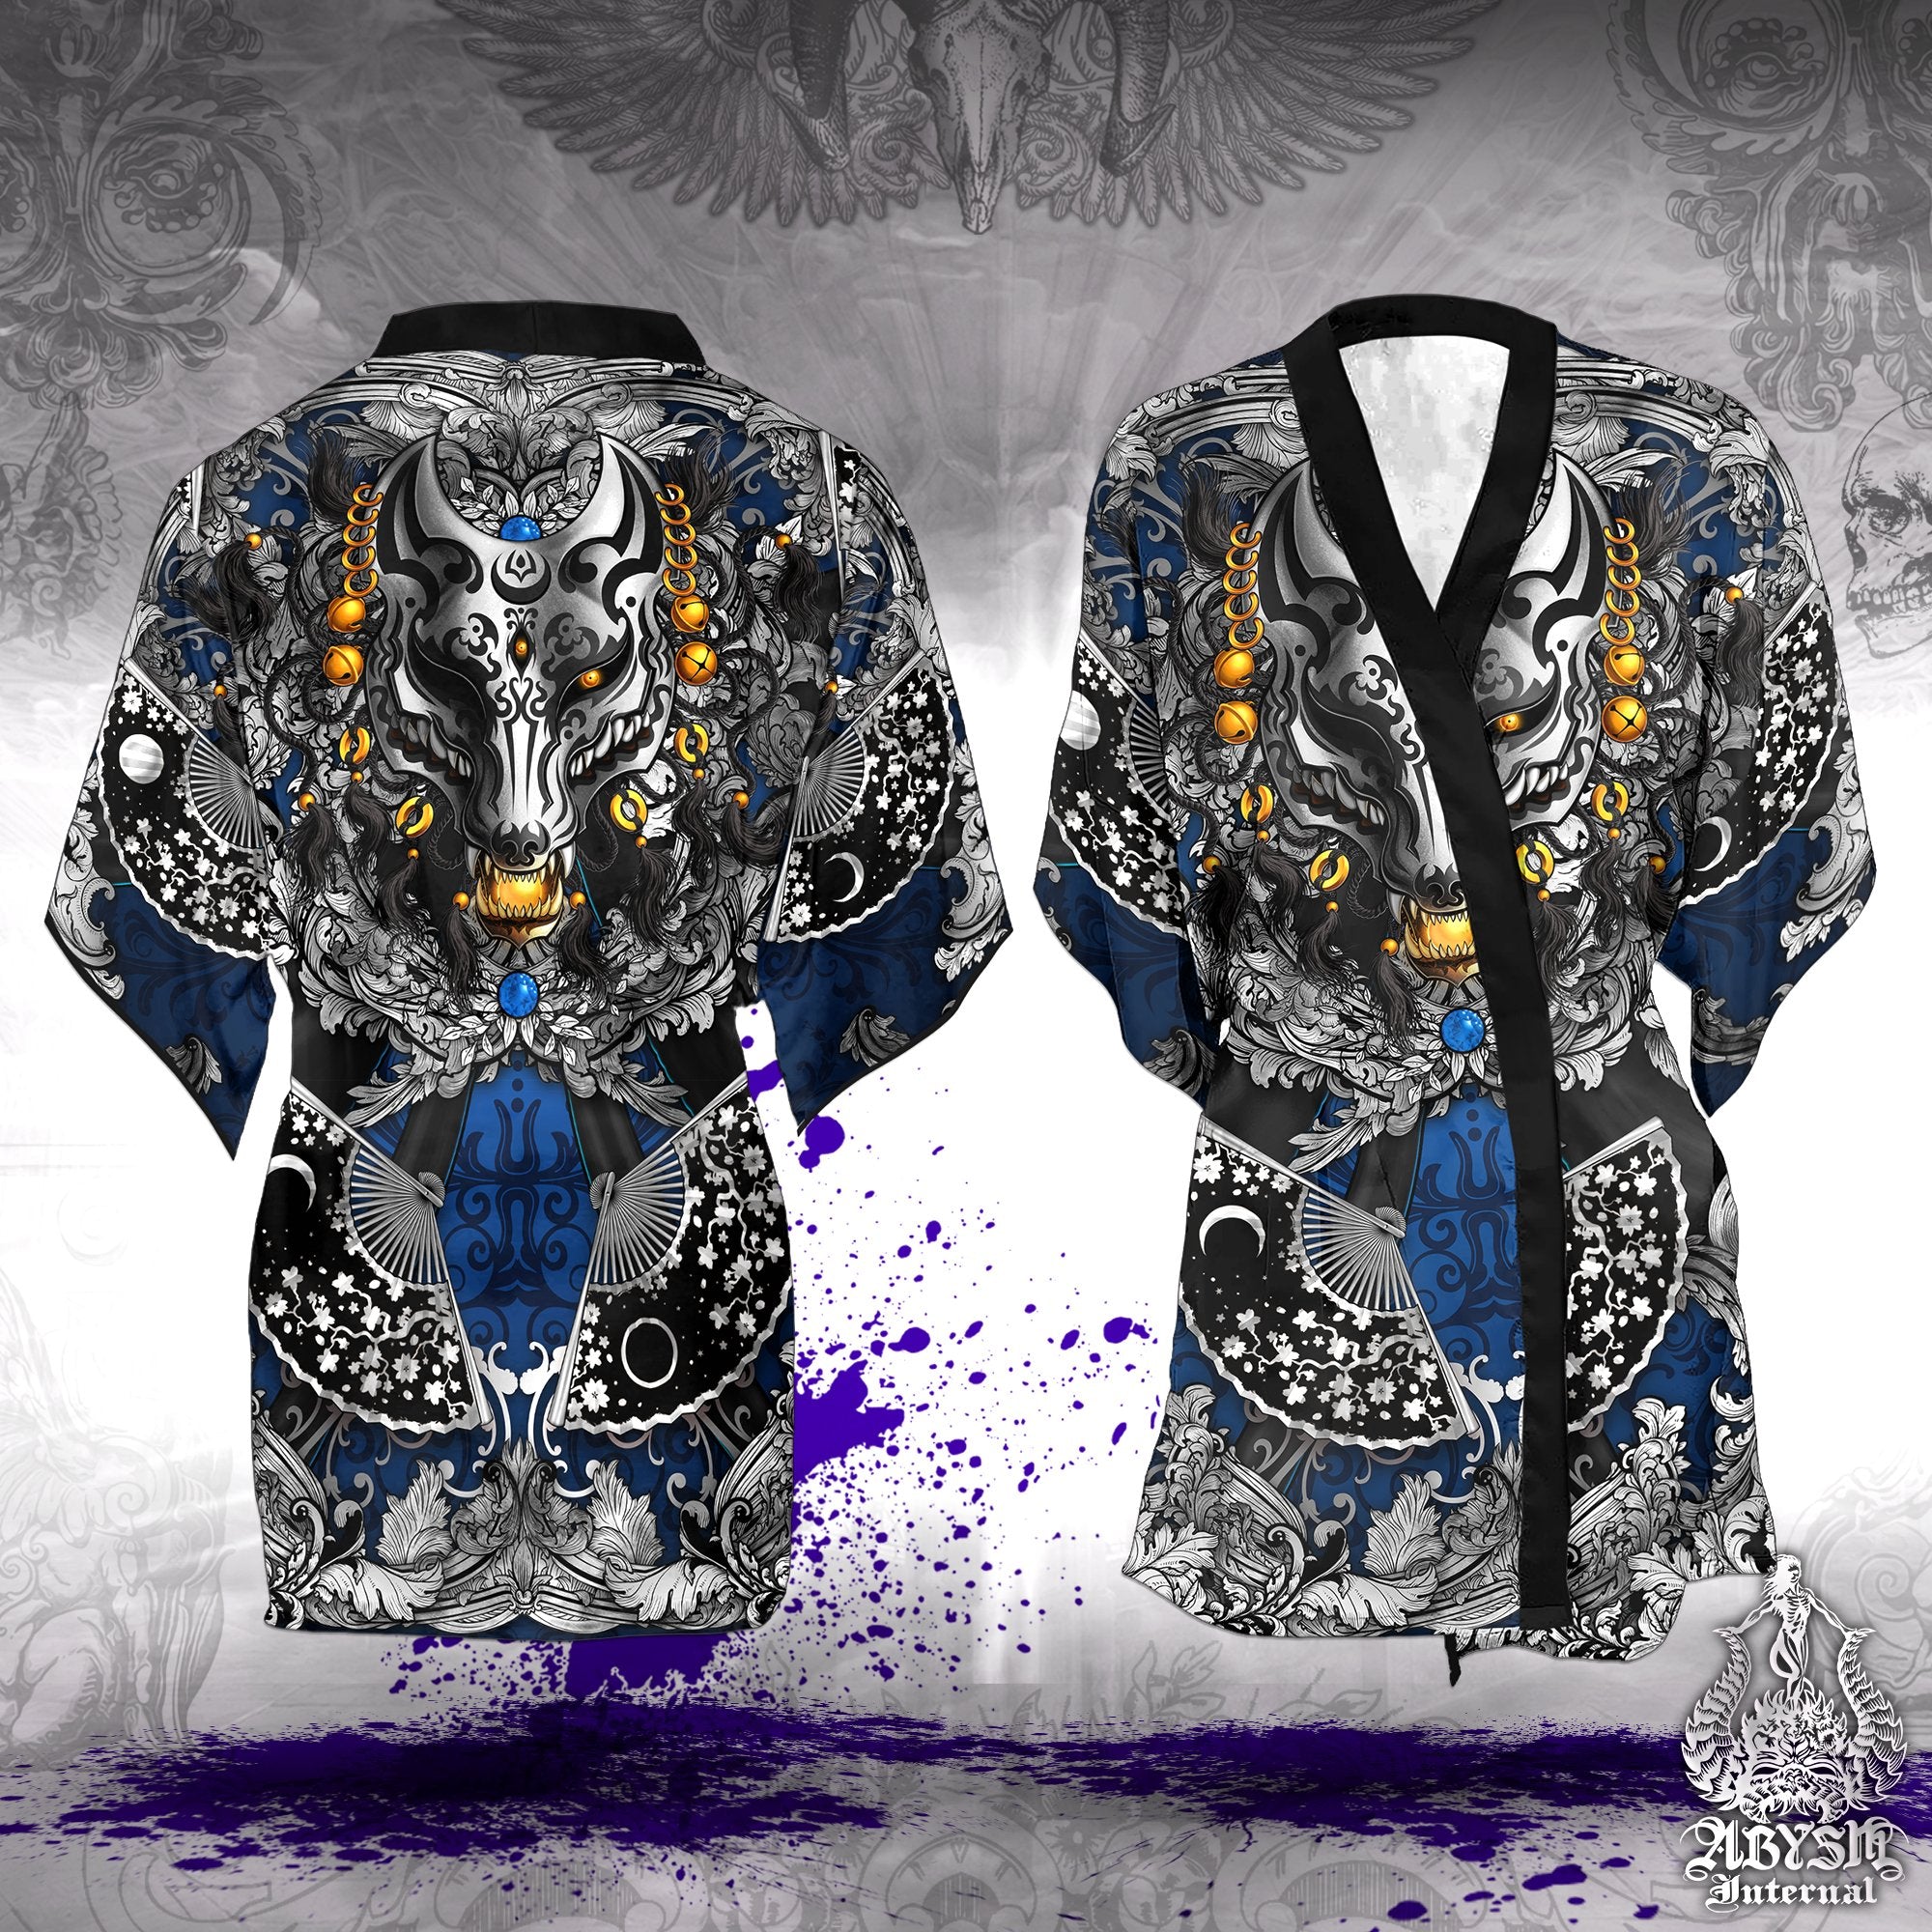 Blue and Silver Fox Short Kimono Robe, Beach Party Outfit, Japanese Coverup, Summer Festival, Indie and Alternative Clothing, Unisex - Kitsune Mask - Abysm Internal